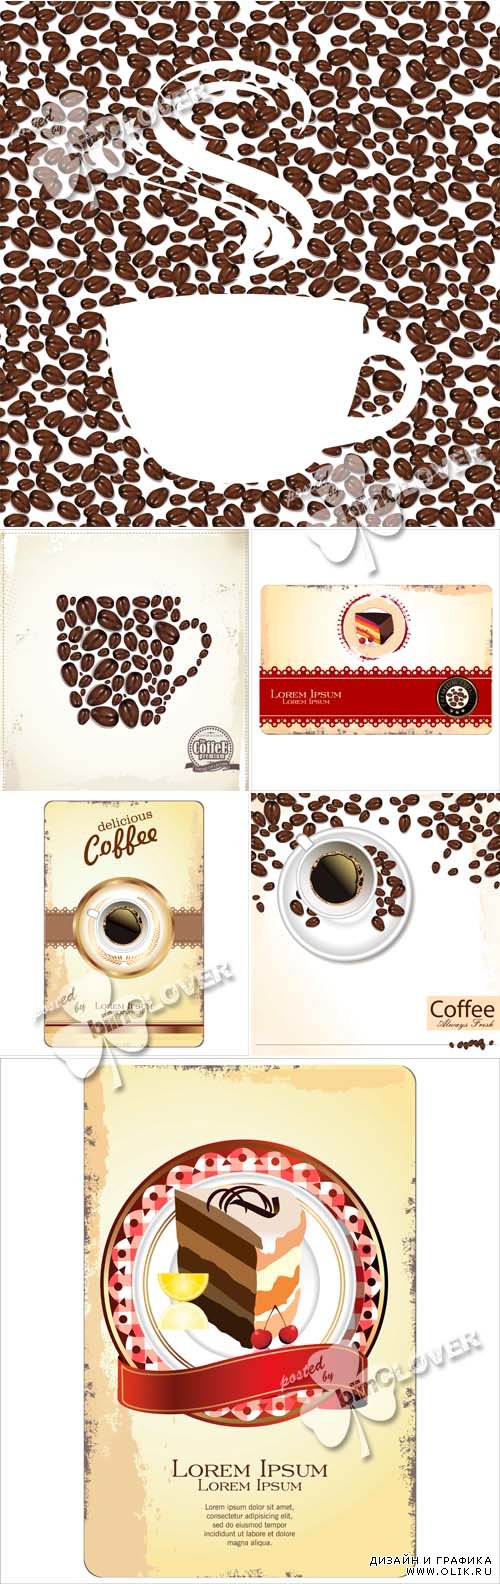 Coffee and cake background 0477